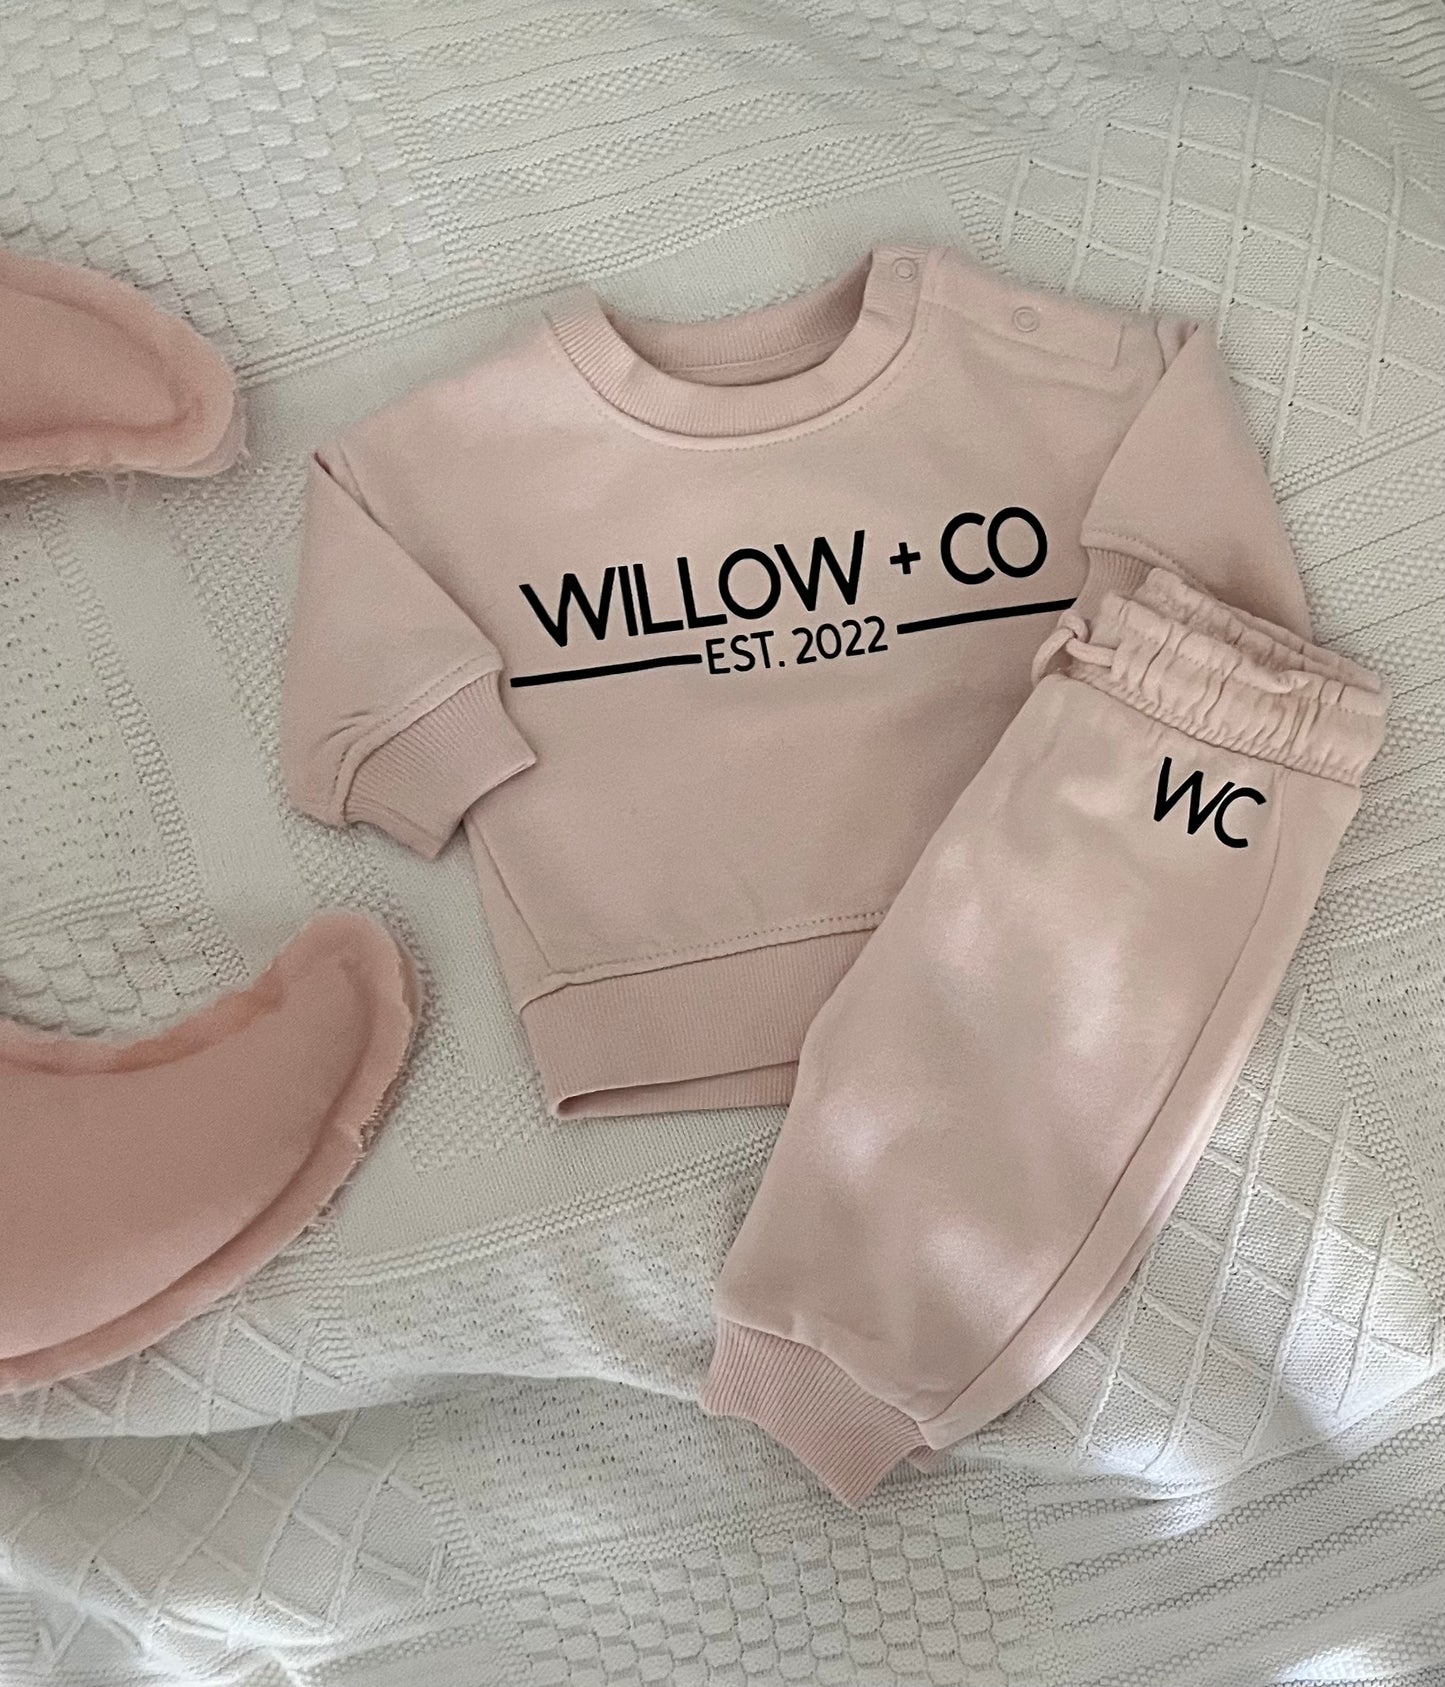 WILLOW+CO PANTS - LIGHT PINK